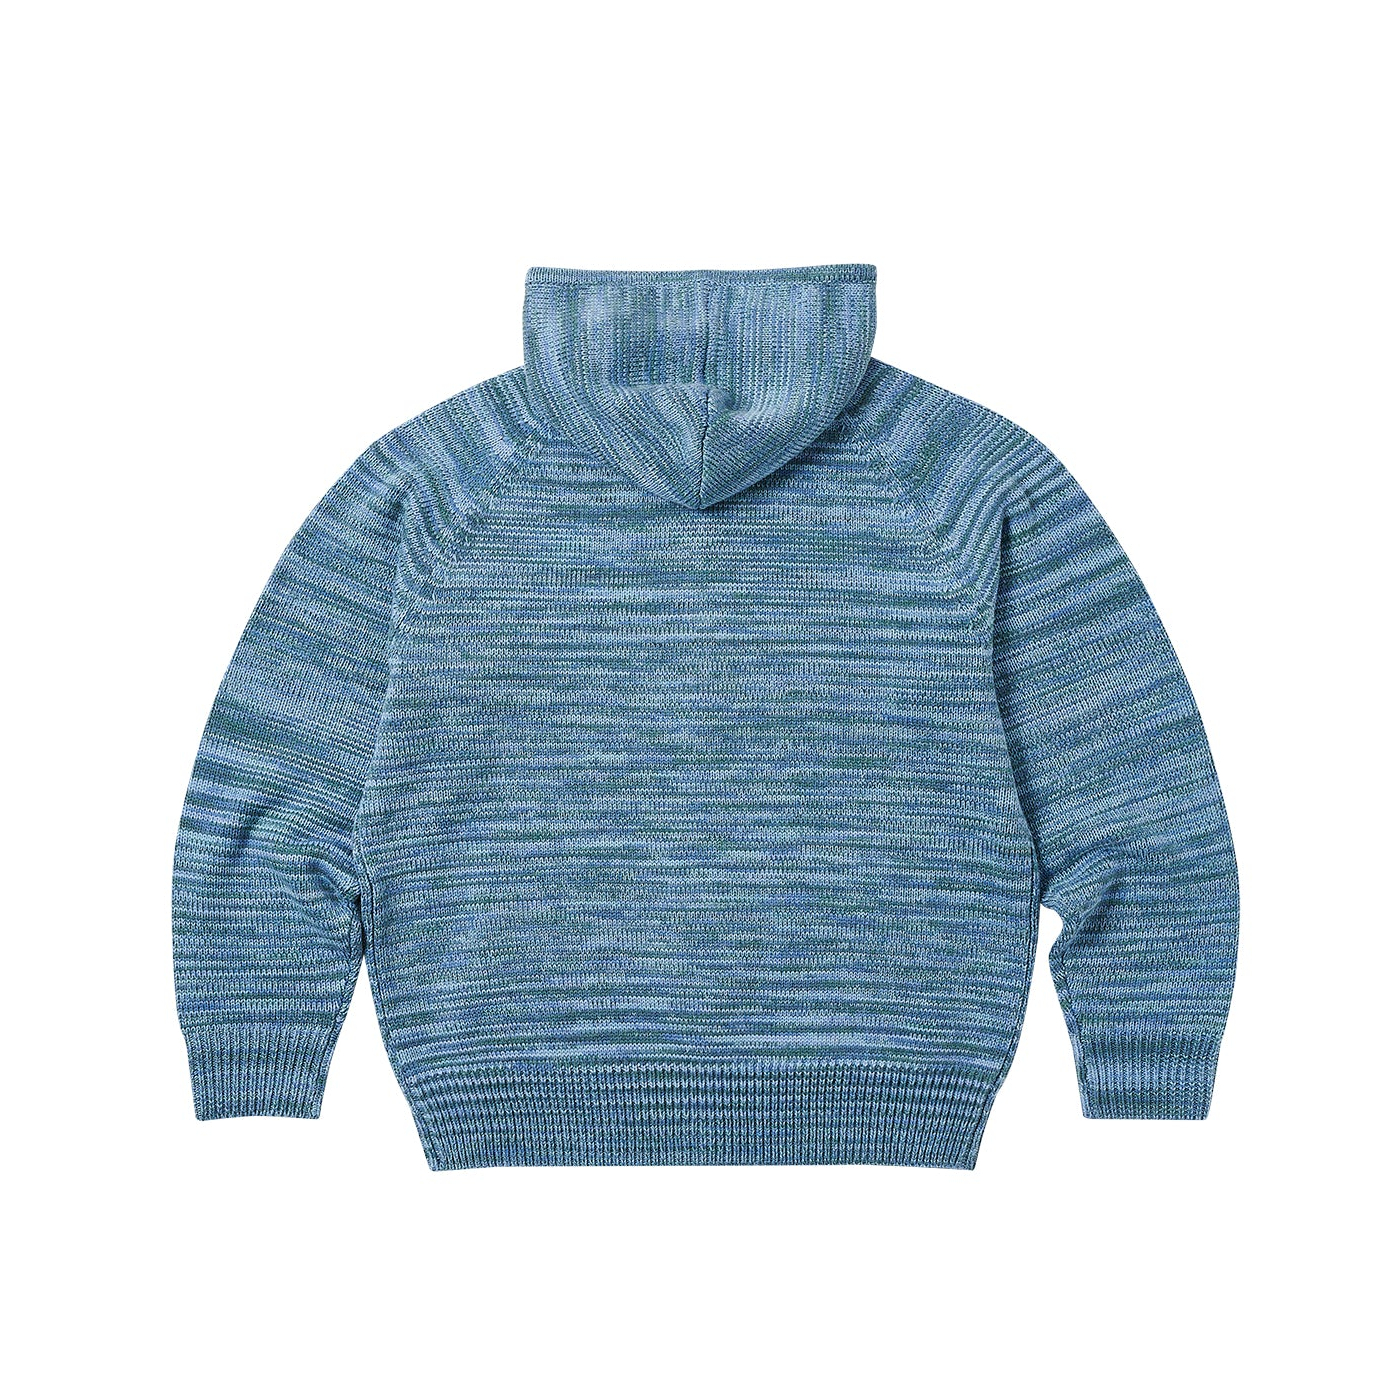 Thumbnail SPACE KNIT BLUE one color